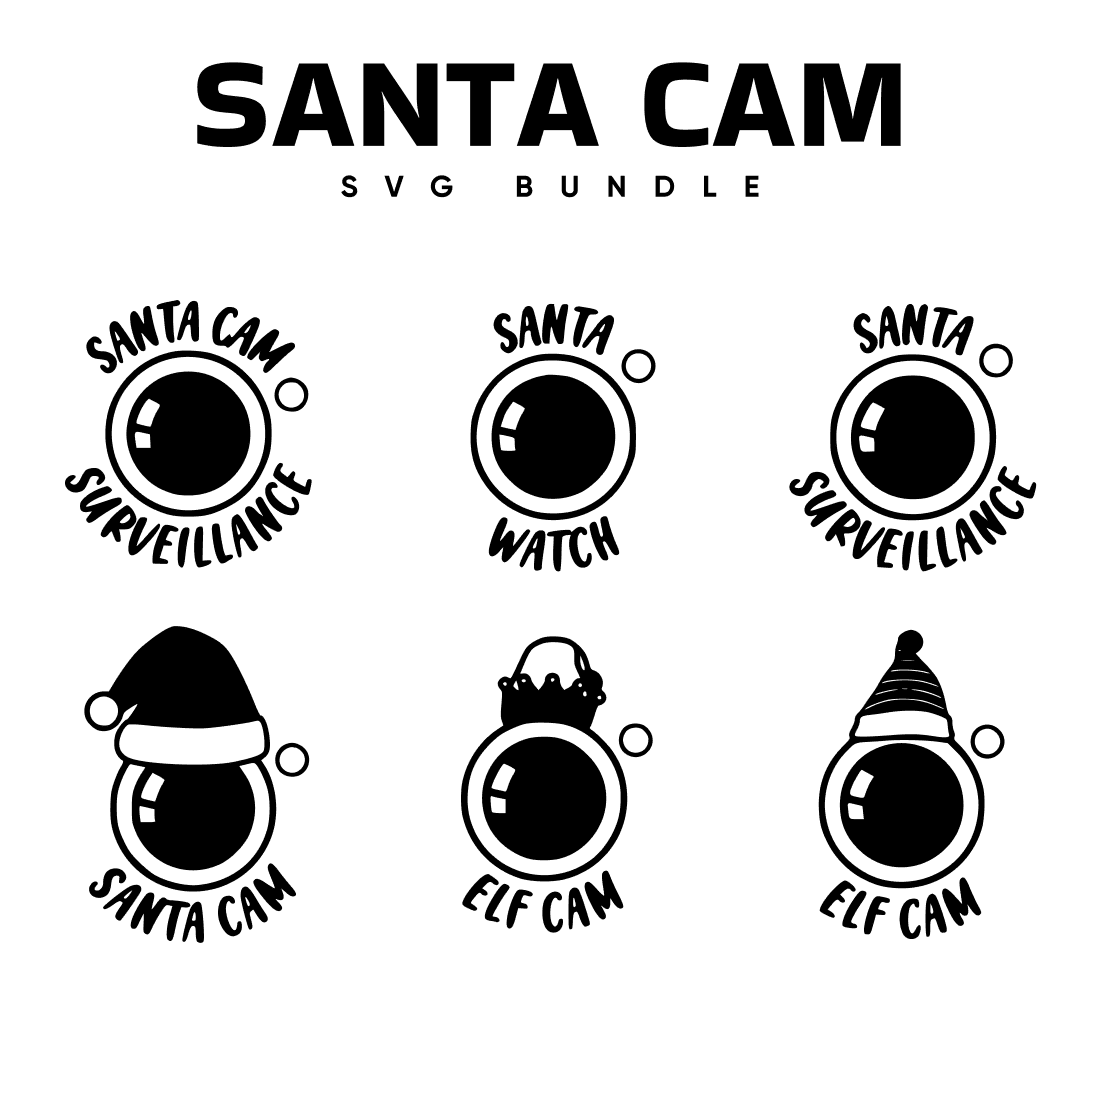 Santa's camera is decorated with Christmas symbols.